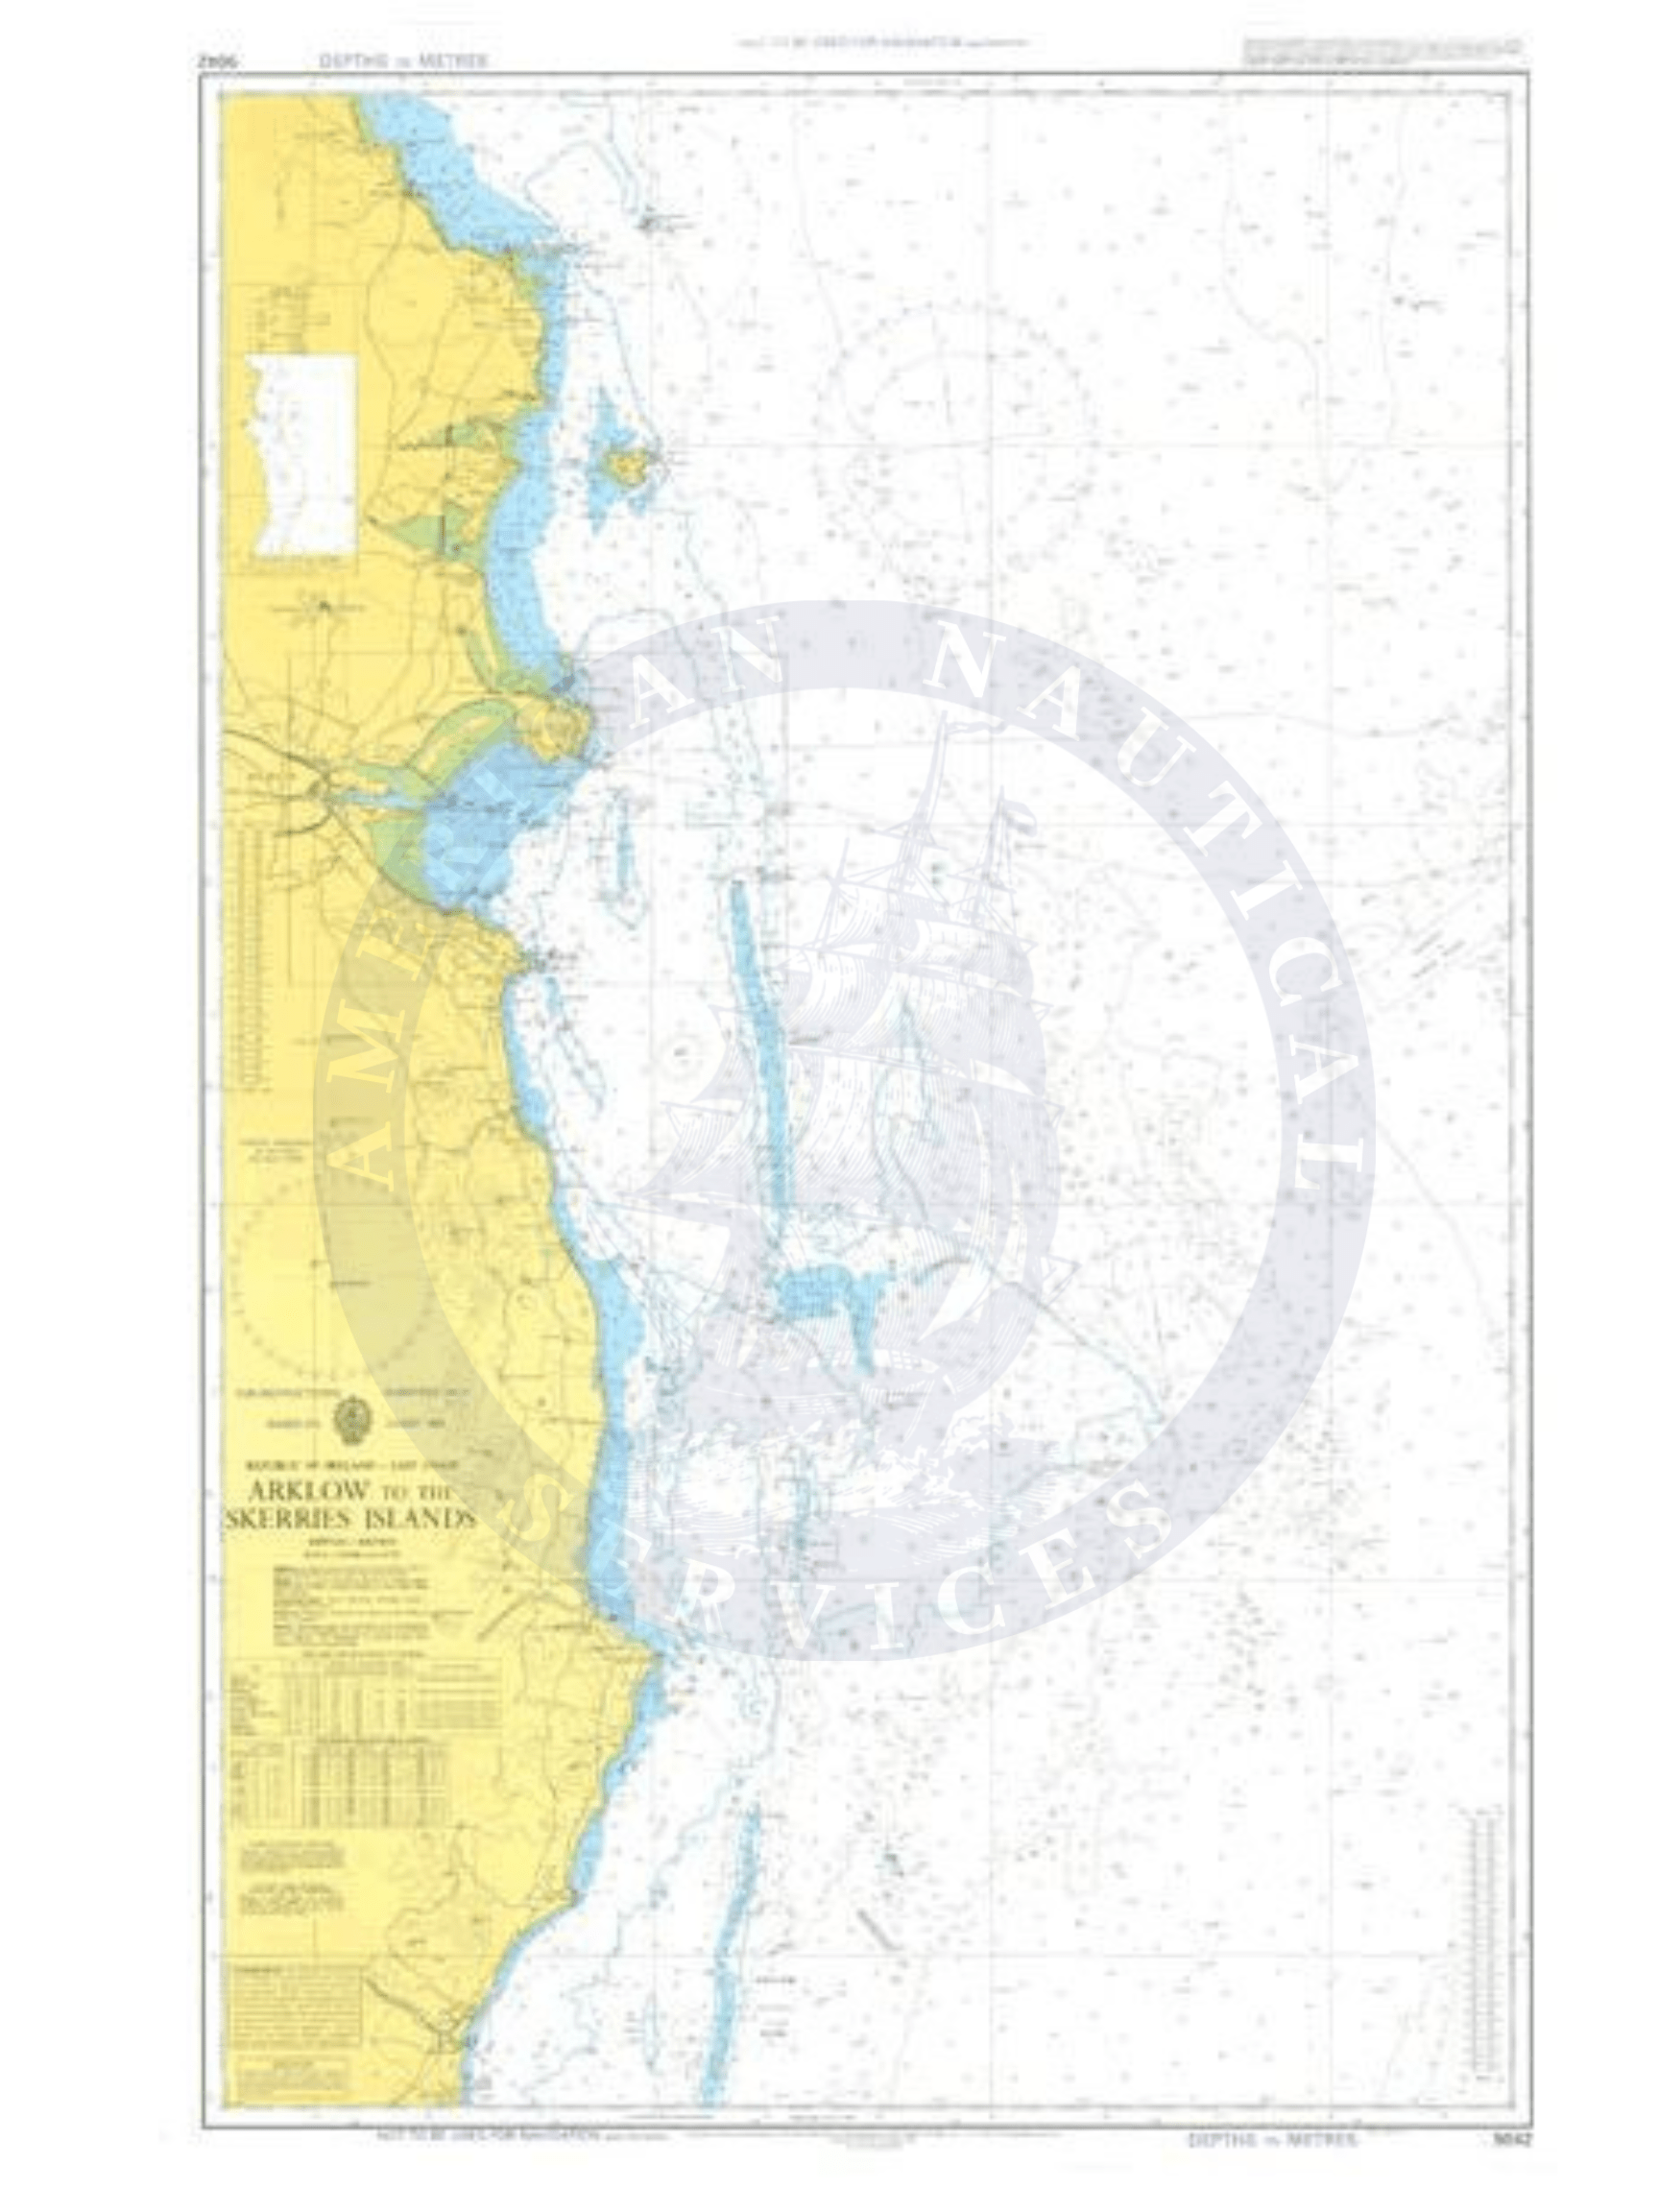 British Admiralty Instructional Chart 5042: Arklow to the Skerries Islands